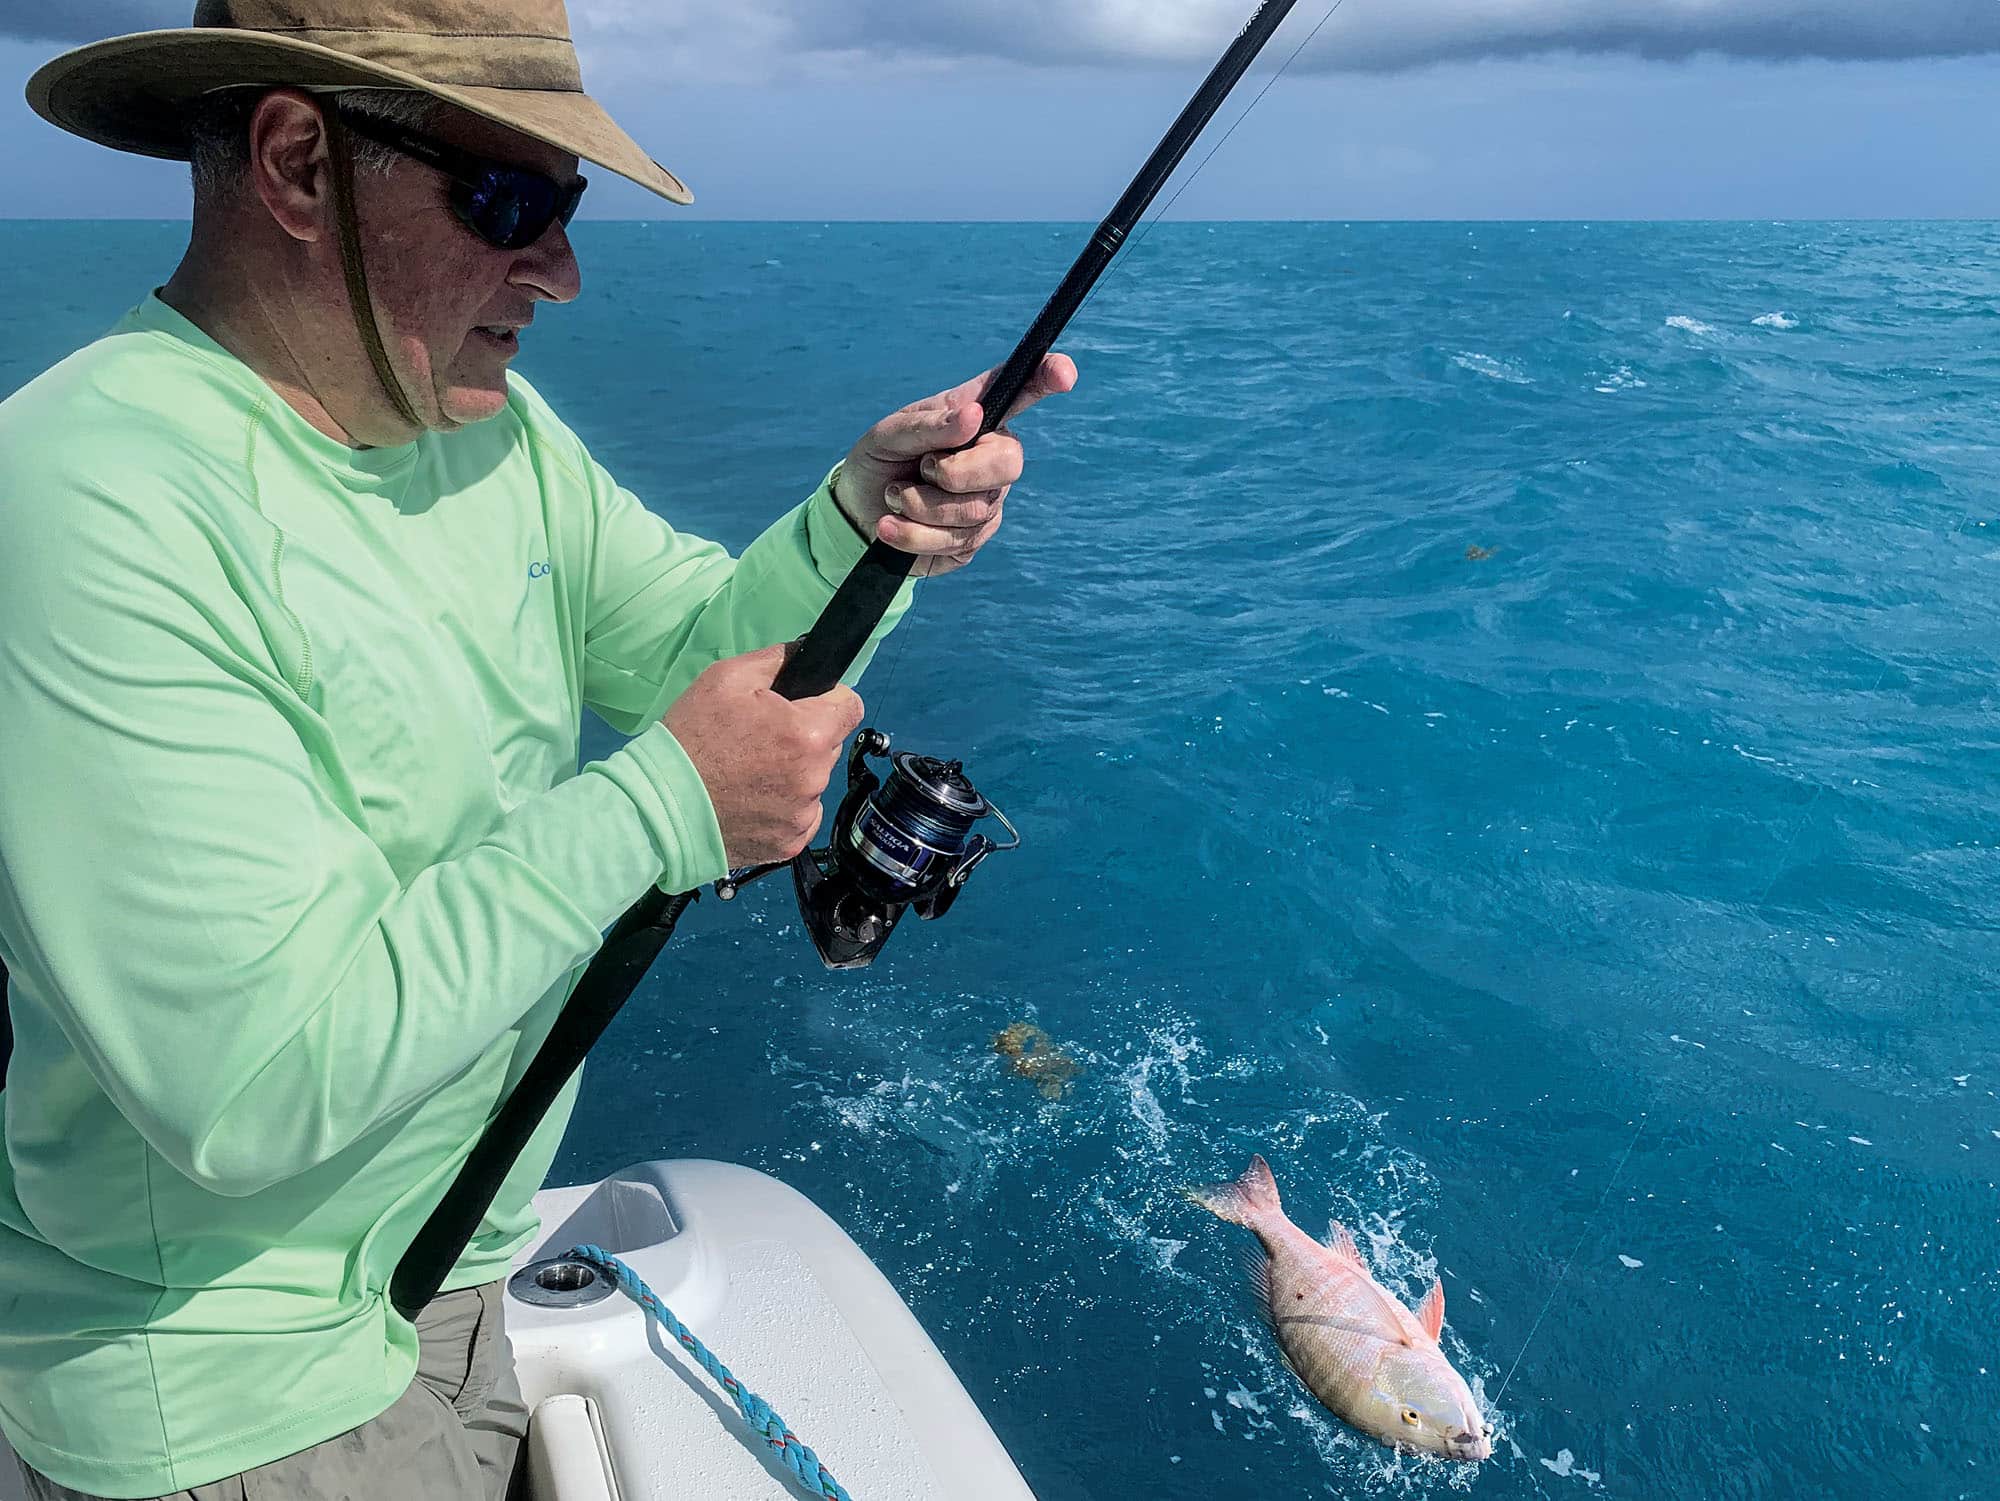 The Best Saltwater Fishing Reels for Under $200 - Fishing Florida